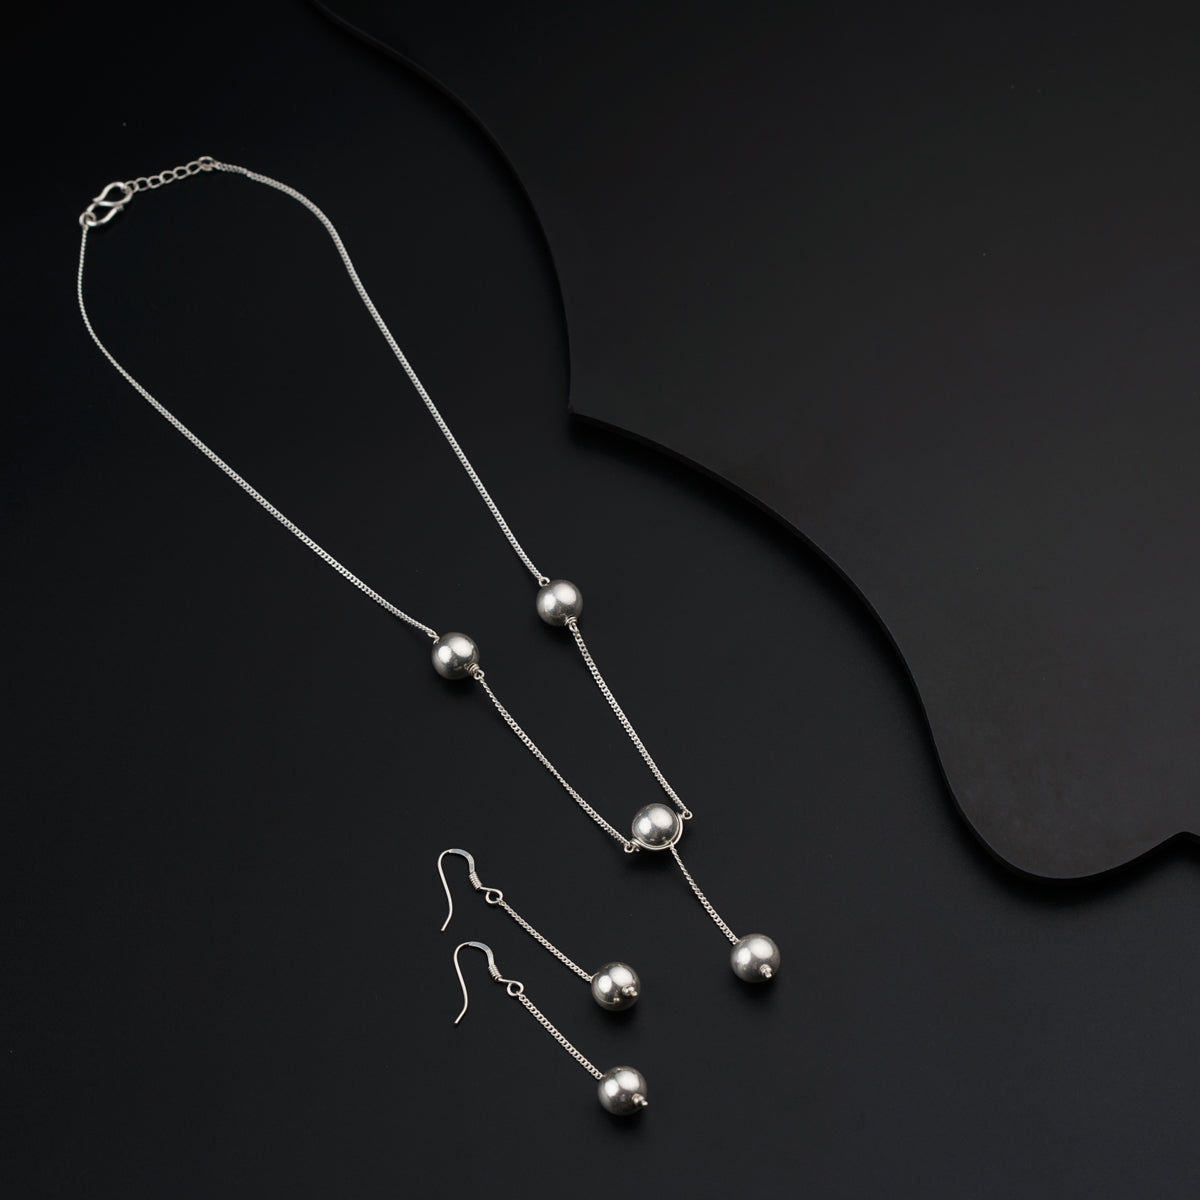 a pair of silver necklaces and earrings on a black background